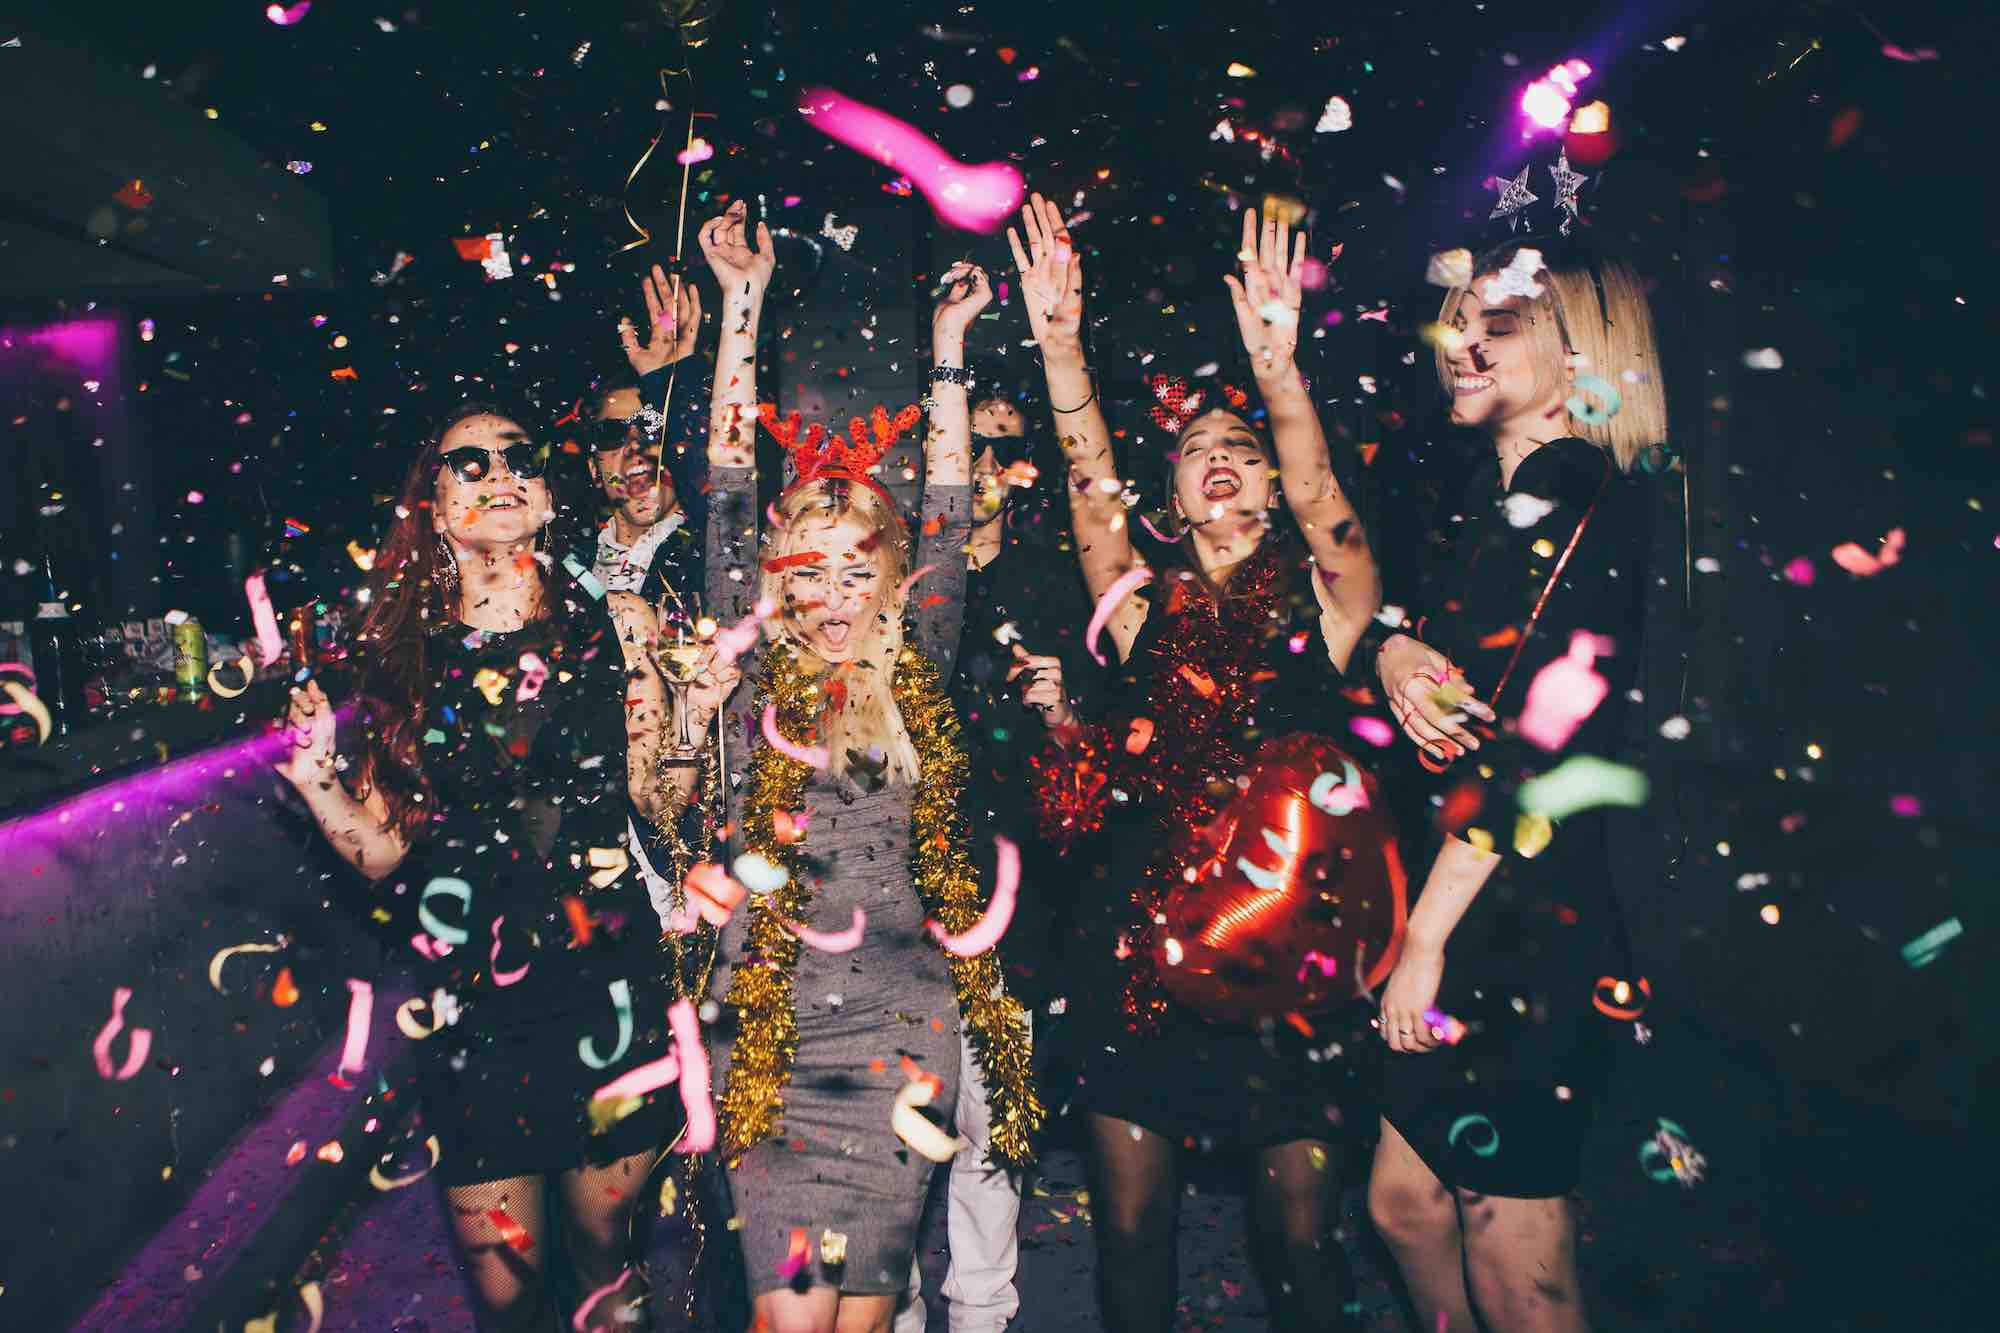 How much should you spend on a bachelor party. Ladies with hands in hair dancing as confetti falls around them